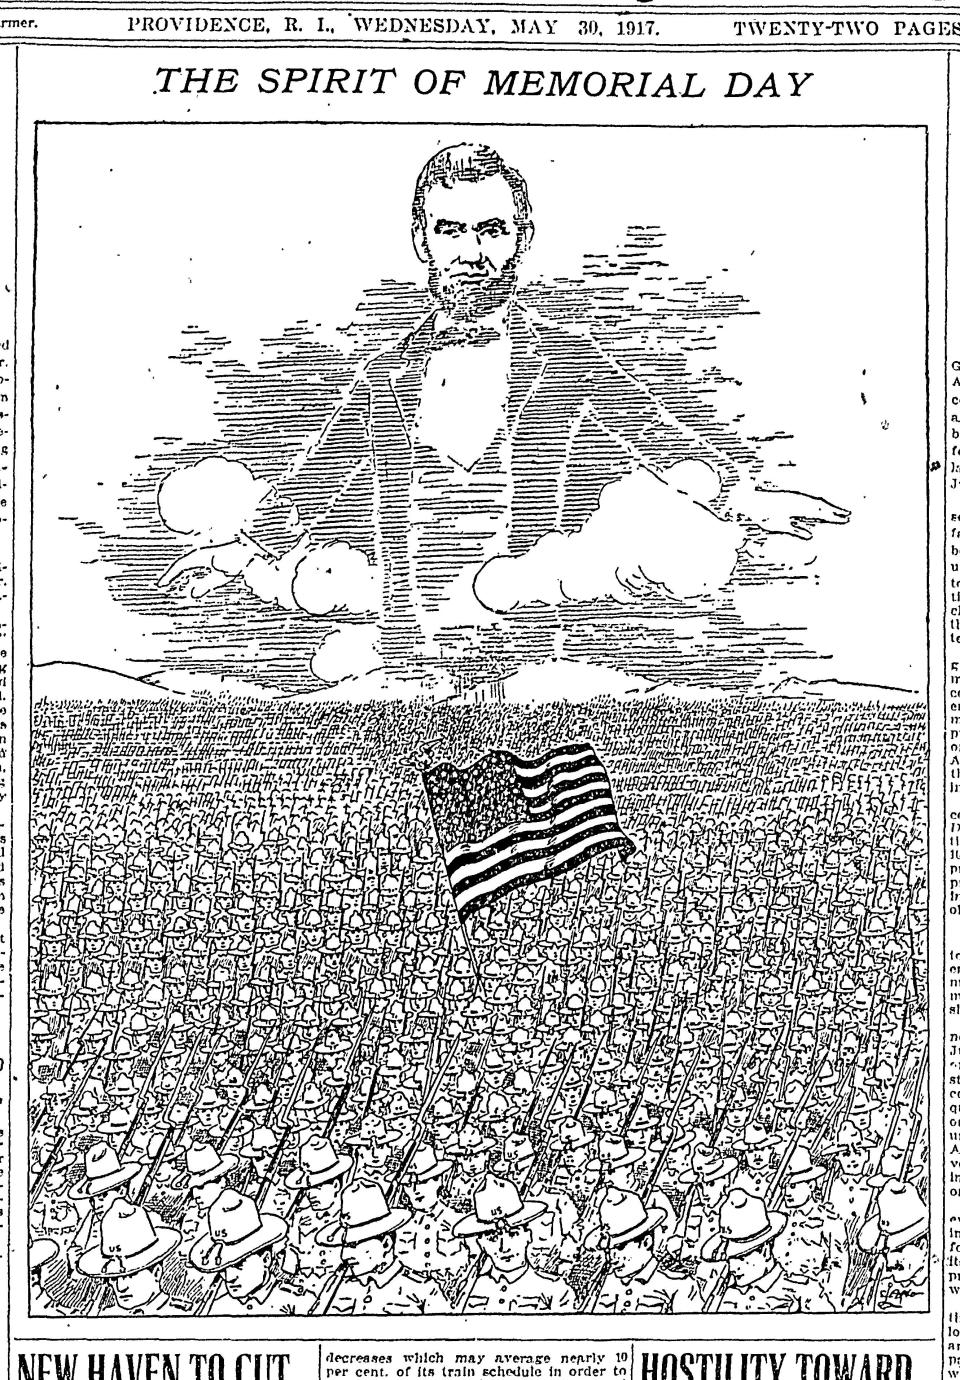 This large illustration adorned the front page of The Providence Journal on May 30, 1917. The symbolism of Civil War-era President Lincoln watching over American troops marching off to fight in World War I is powerful.